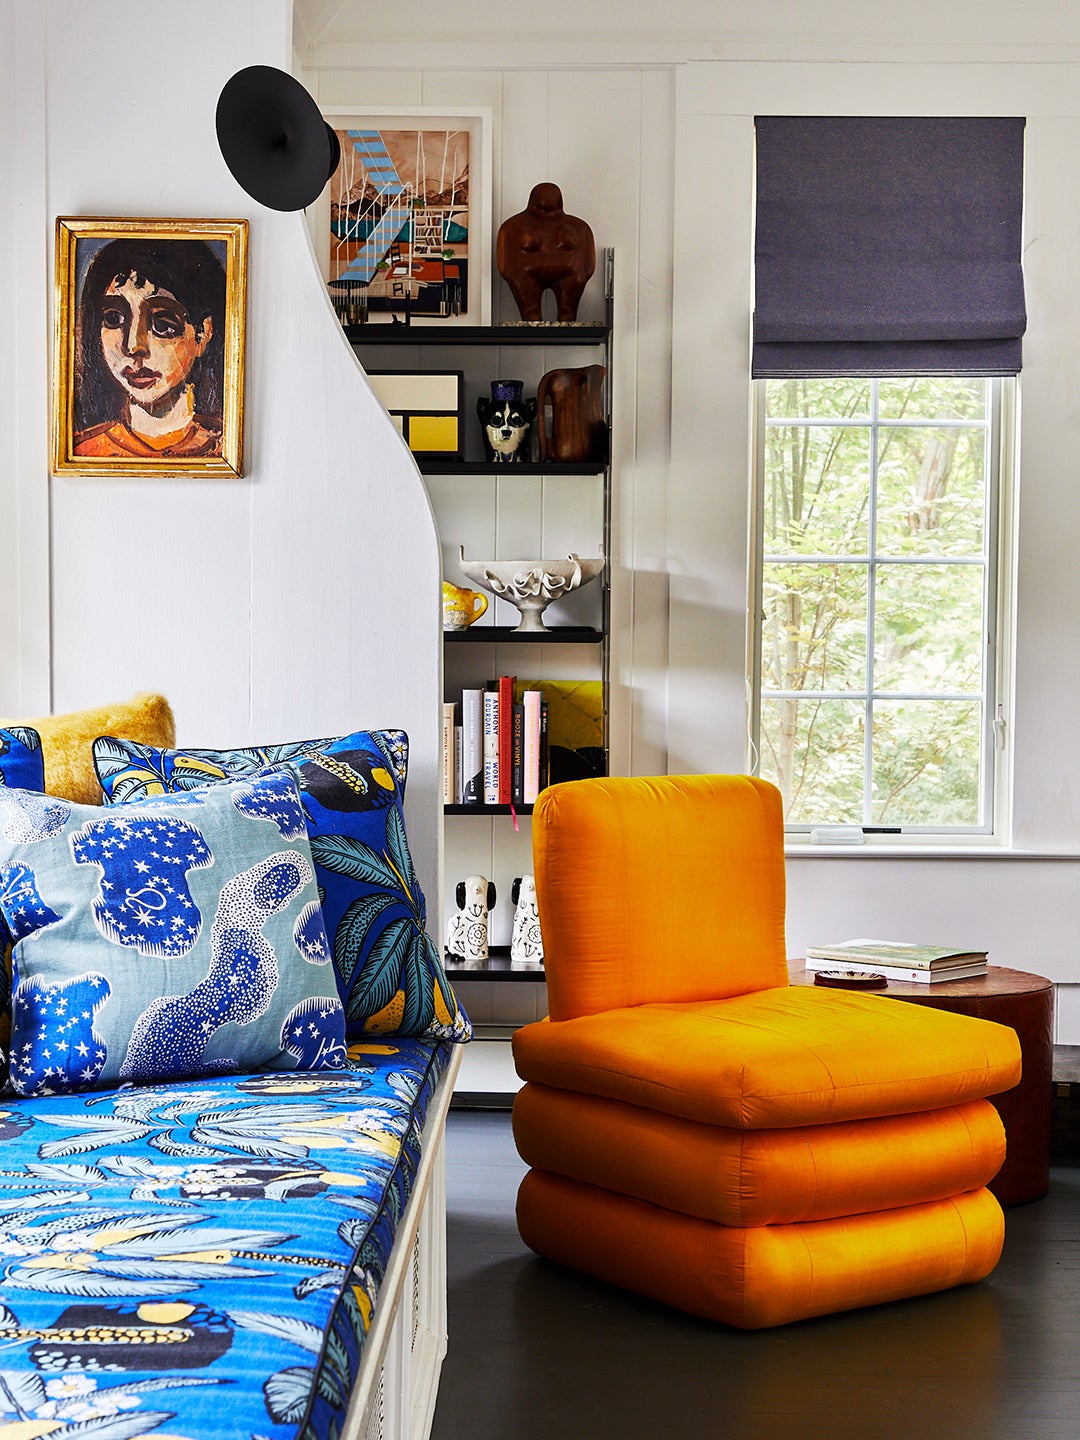 bright orange chair next to patterned blue window seat